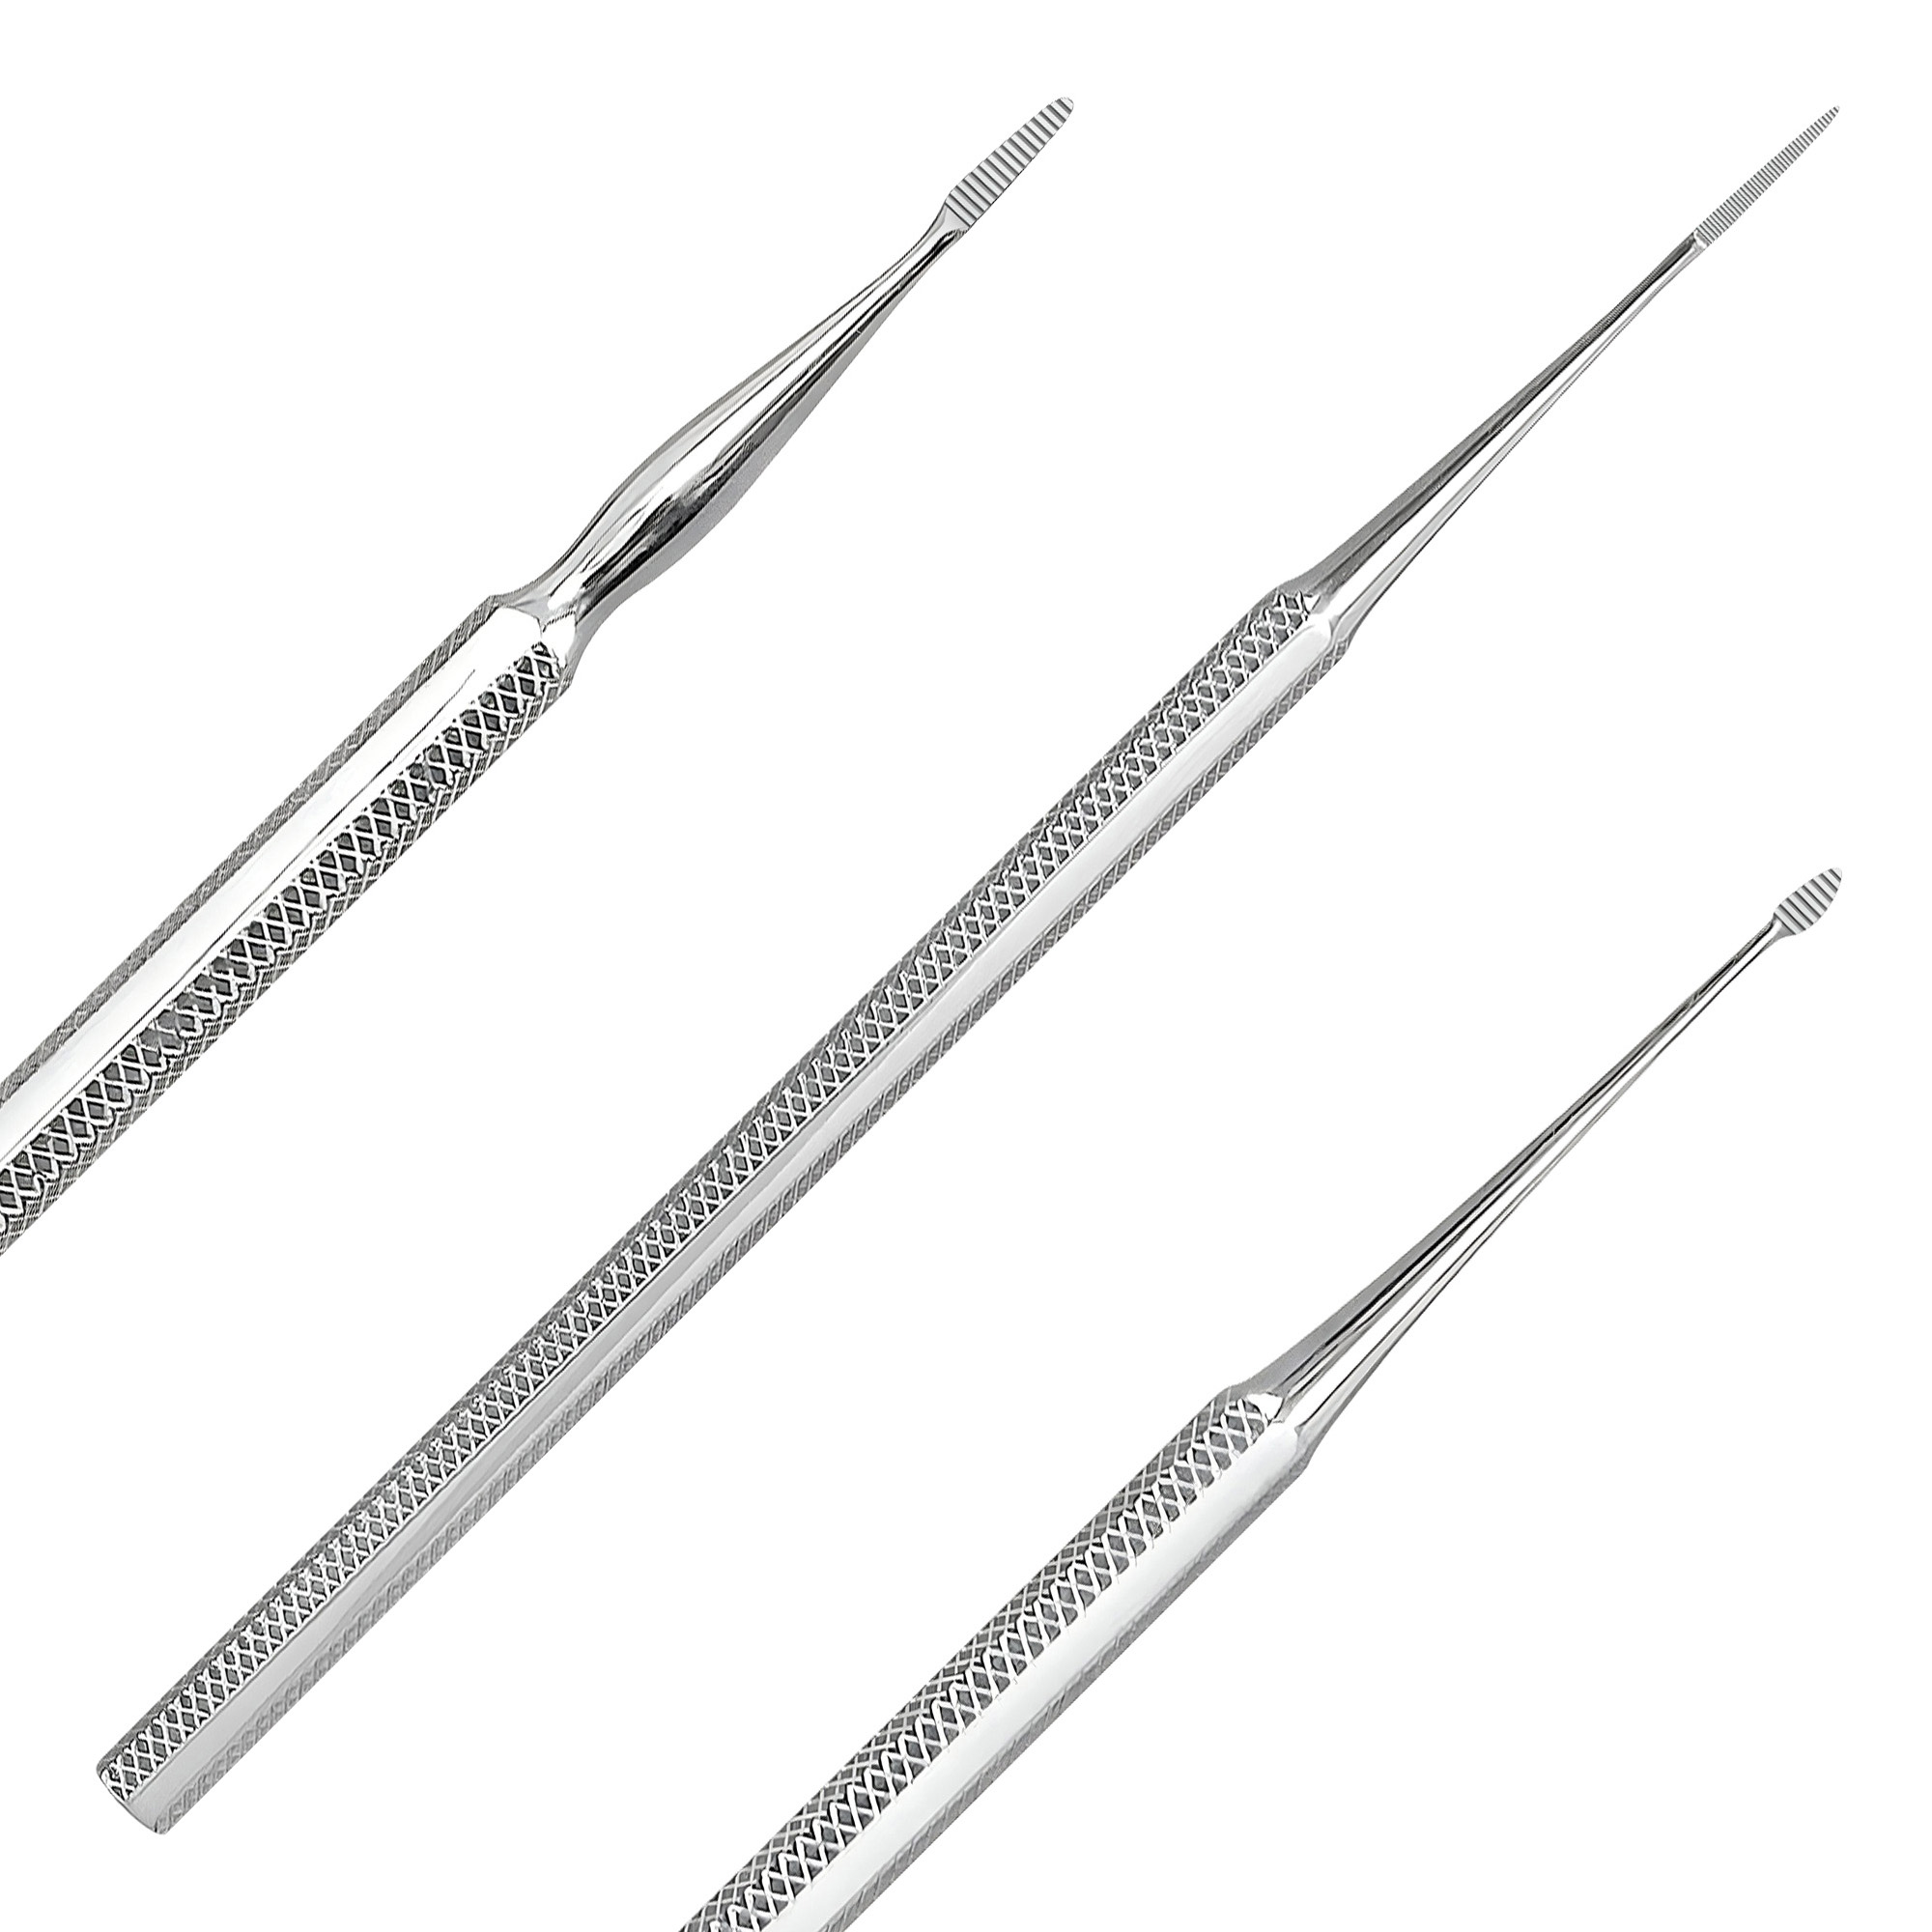 Promotion Microfiles professional nail scrapers 3 pcs